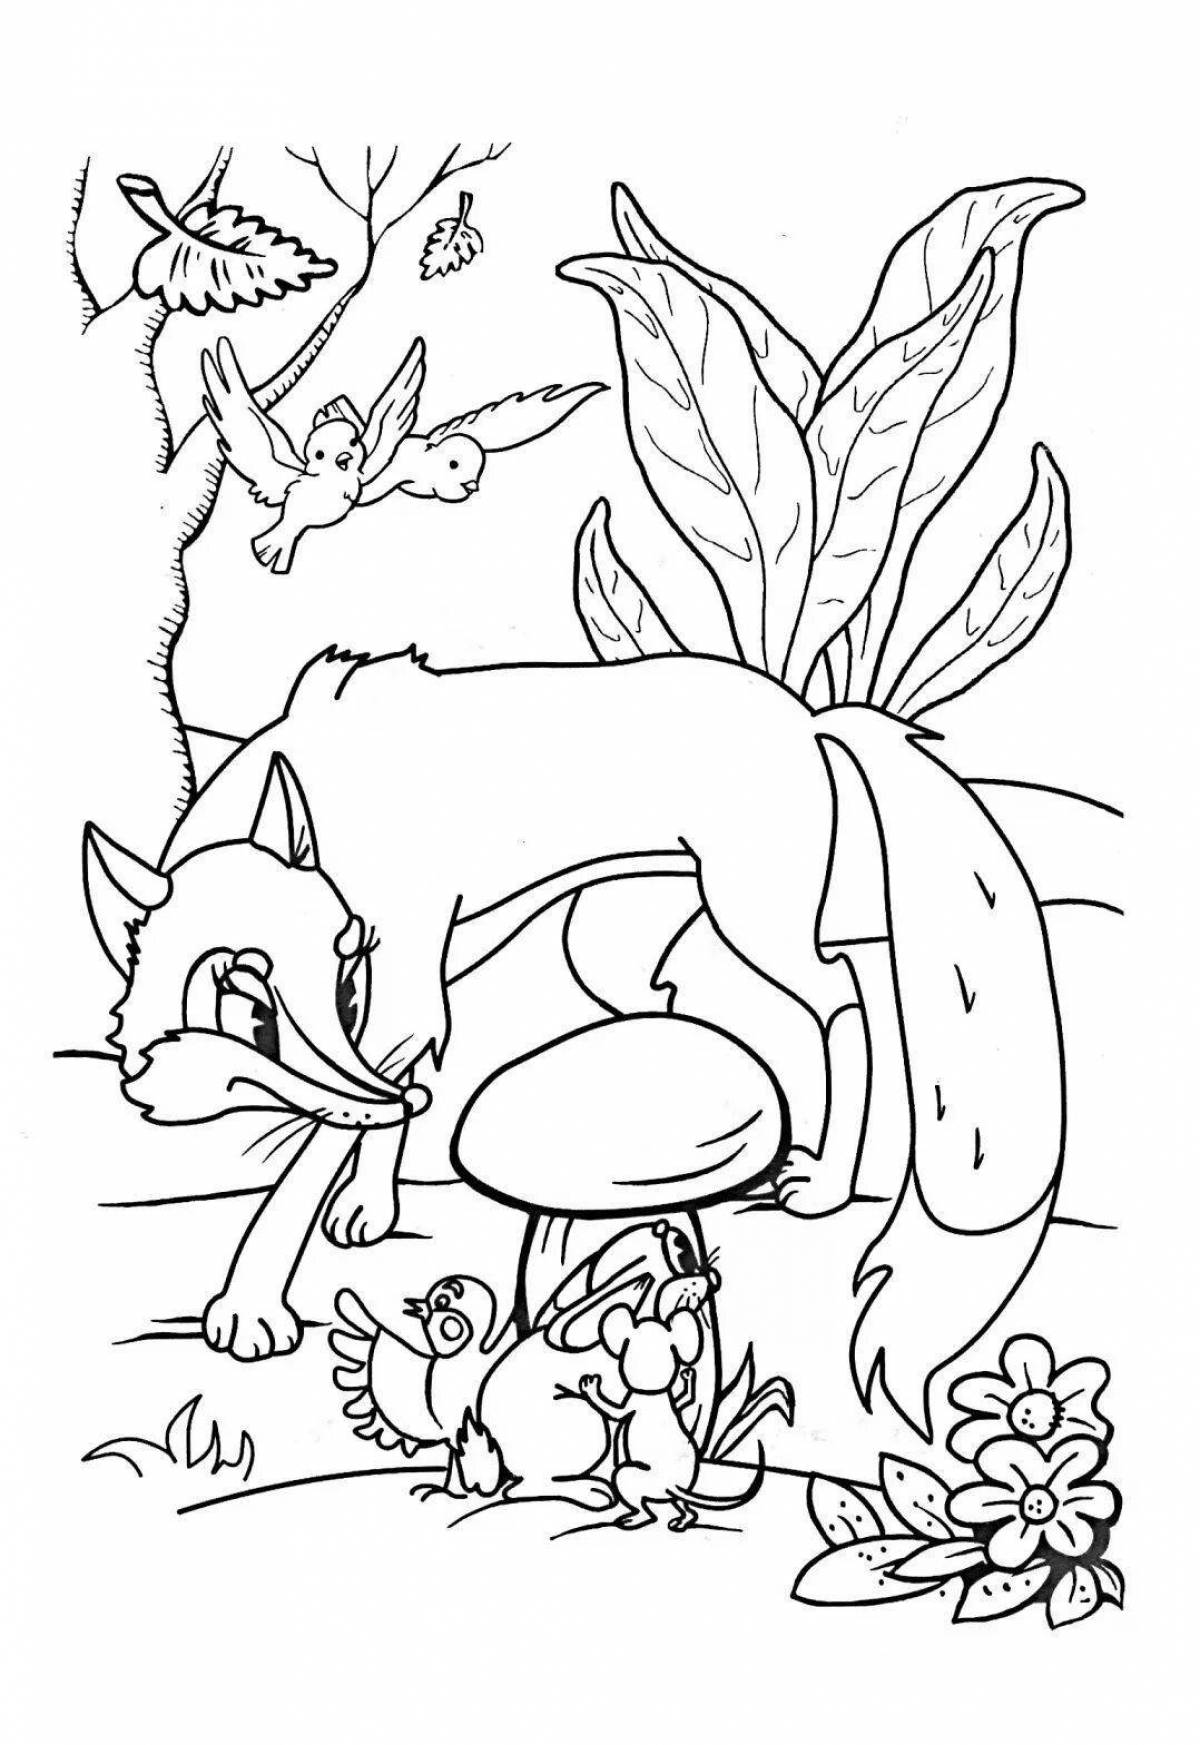 Cute fox and mouse coloring book